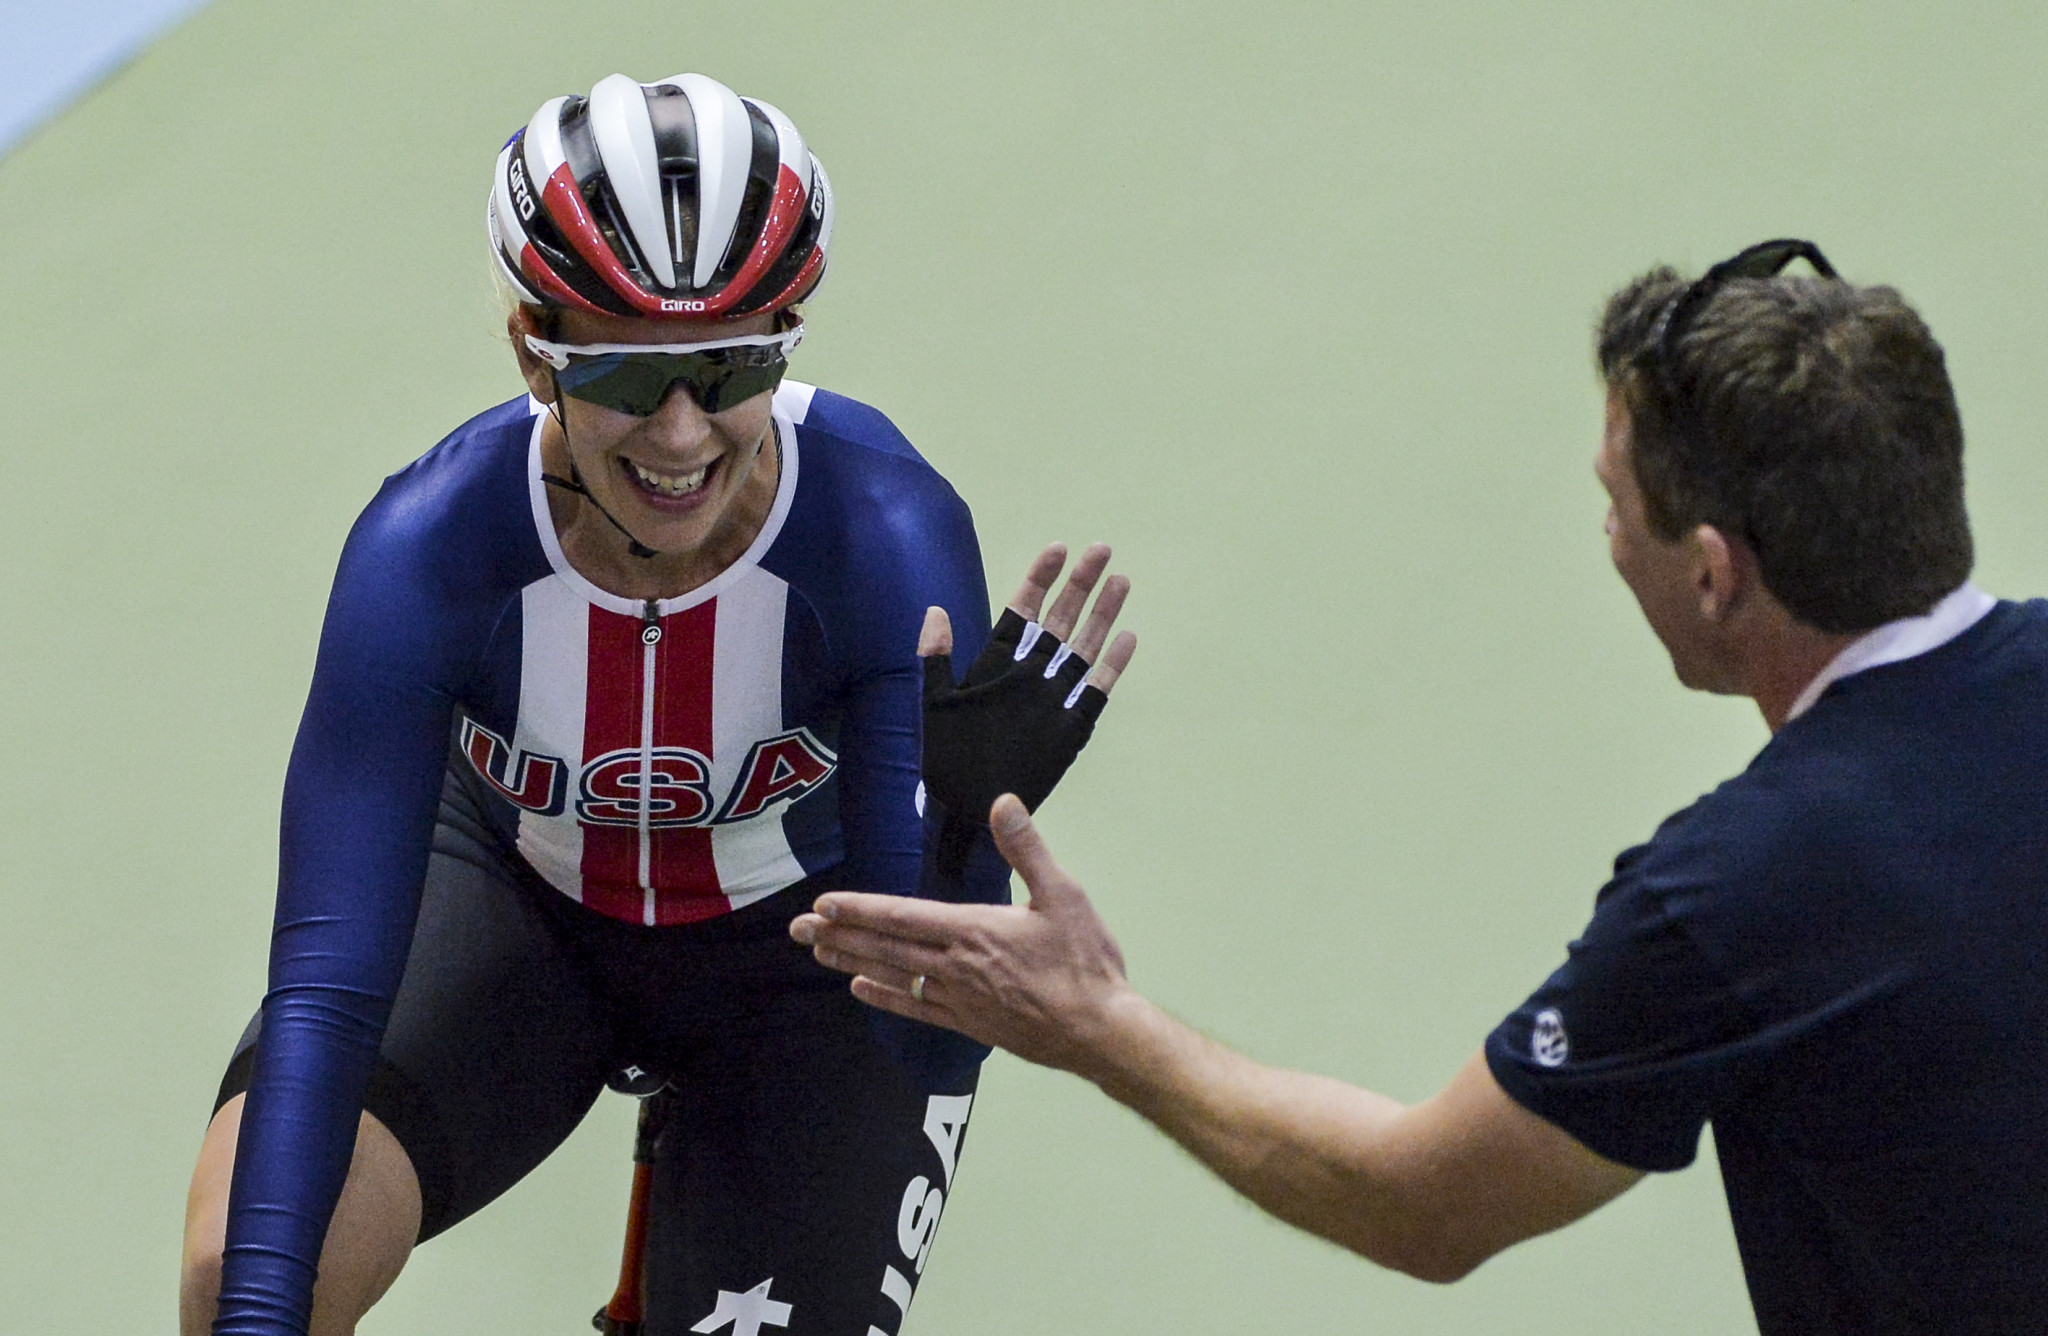 Eight-time world champion Hammer announces retirement from professional cycling